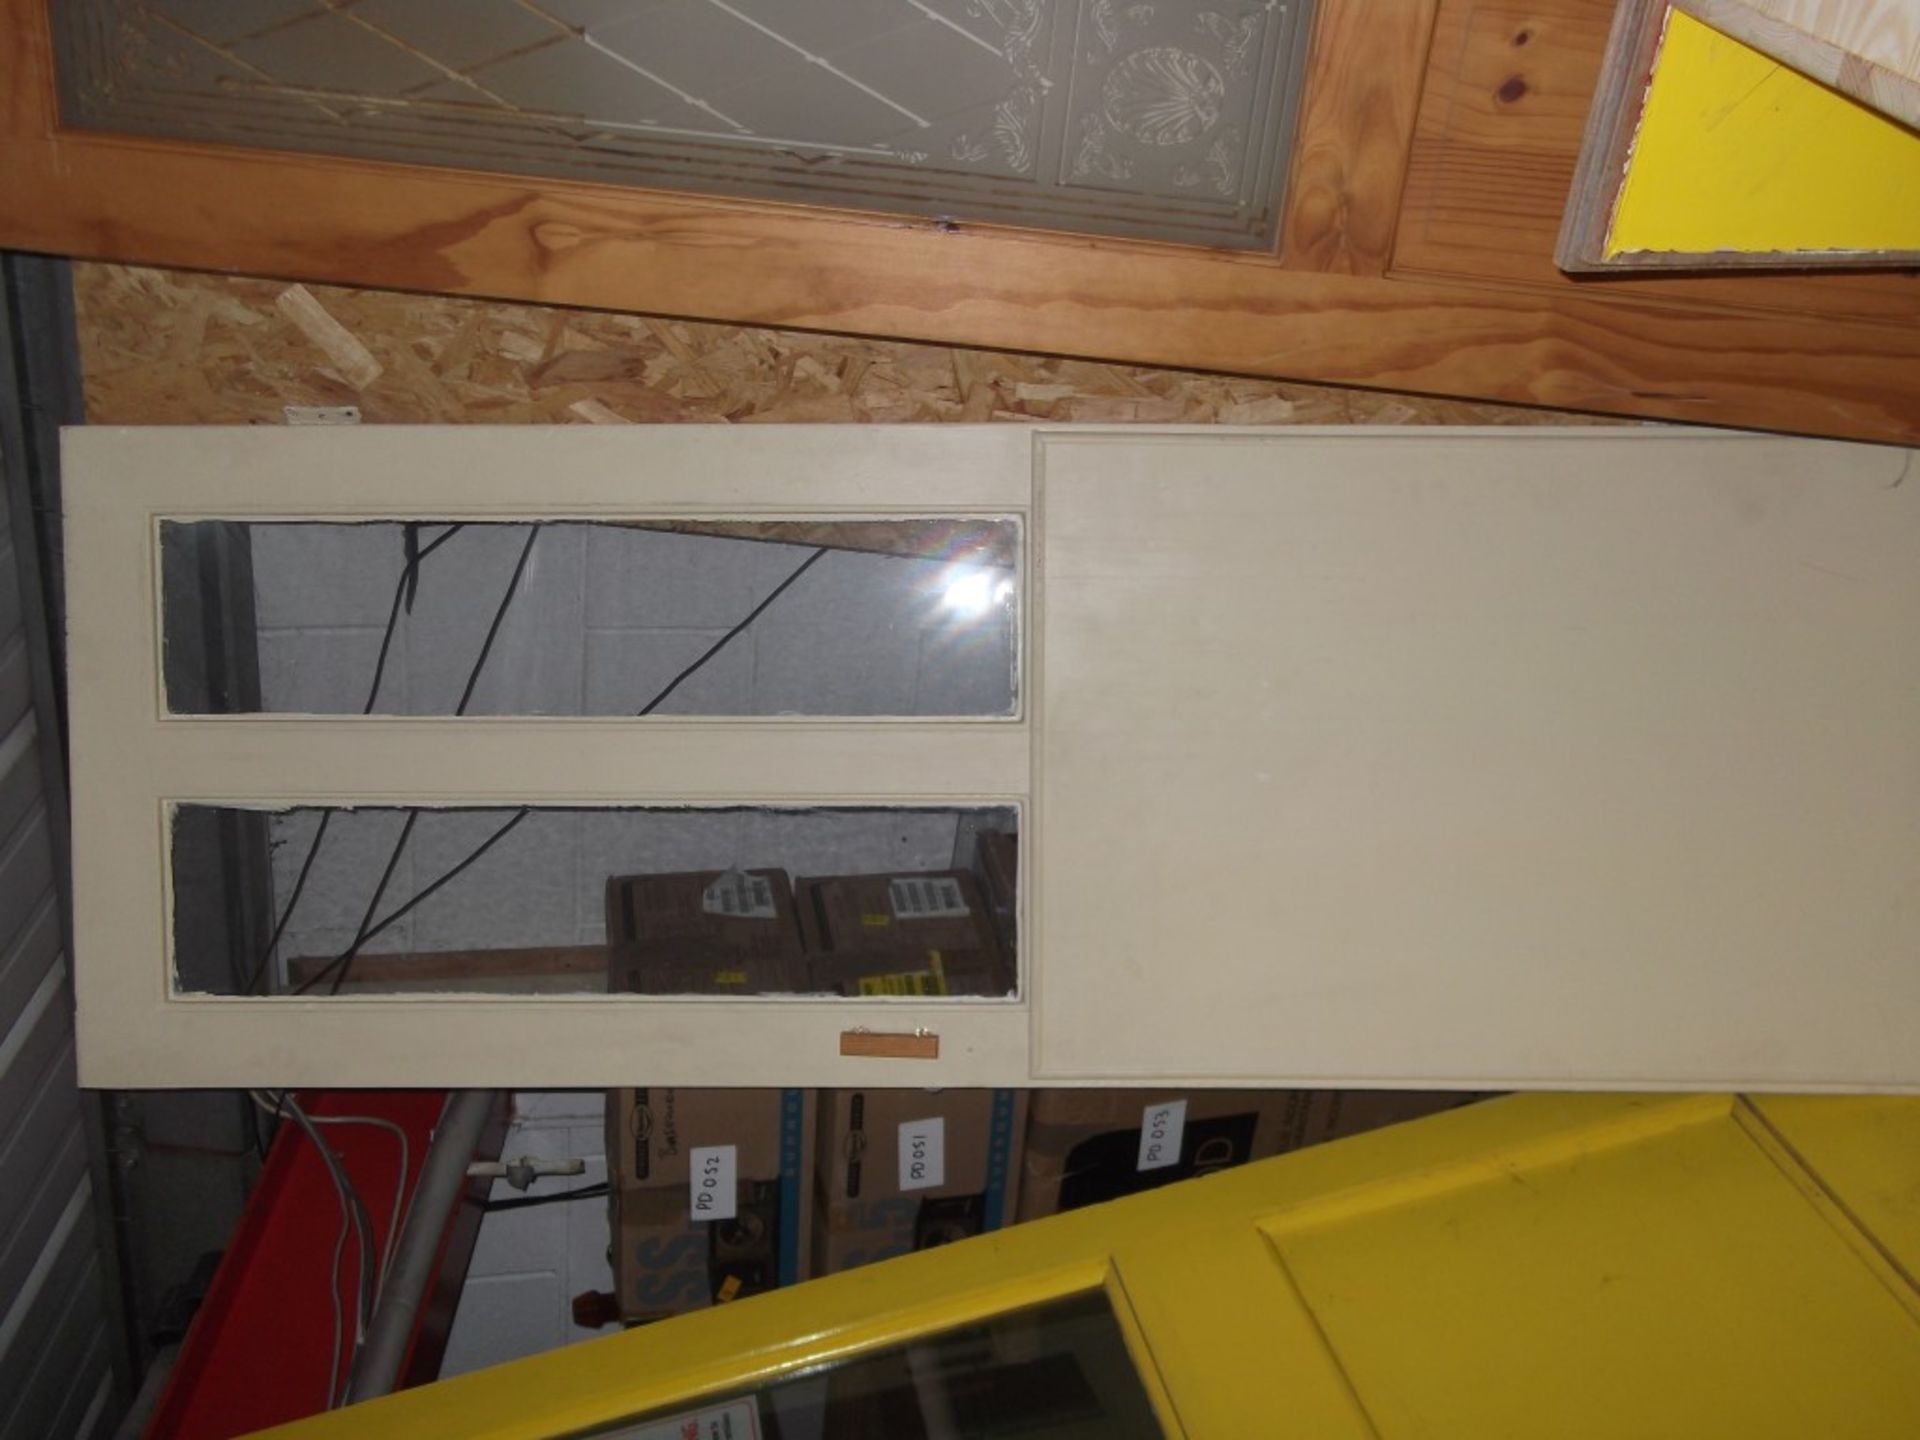 1 x Door Featuring 2 Glass Panels - Pre-owned In Useable Condition - Dimensions: H197.5 x W68cm - - Image 3 of 5